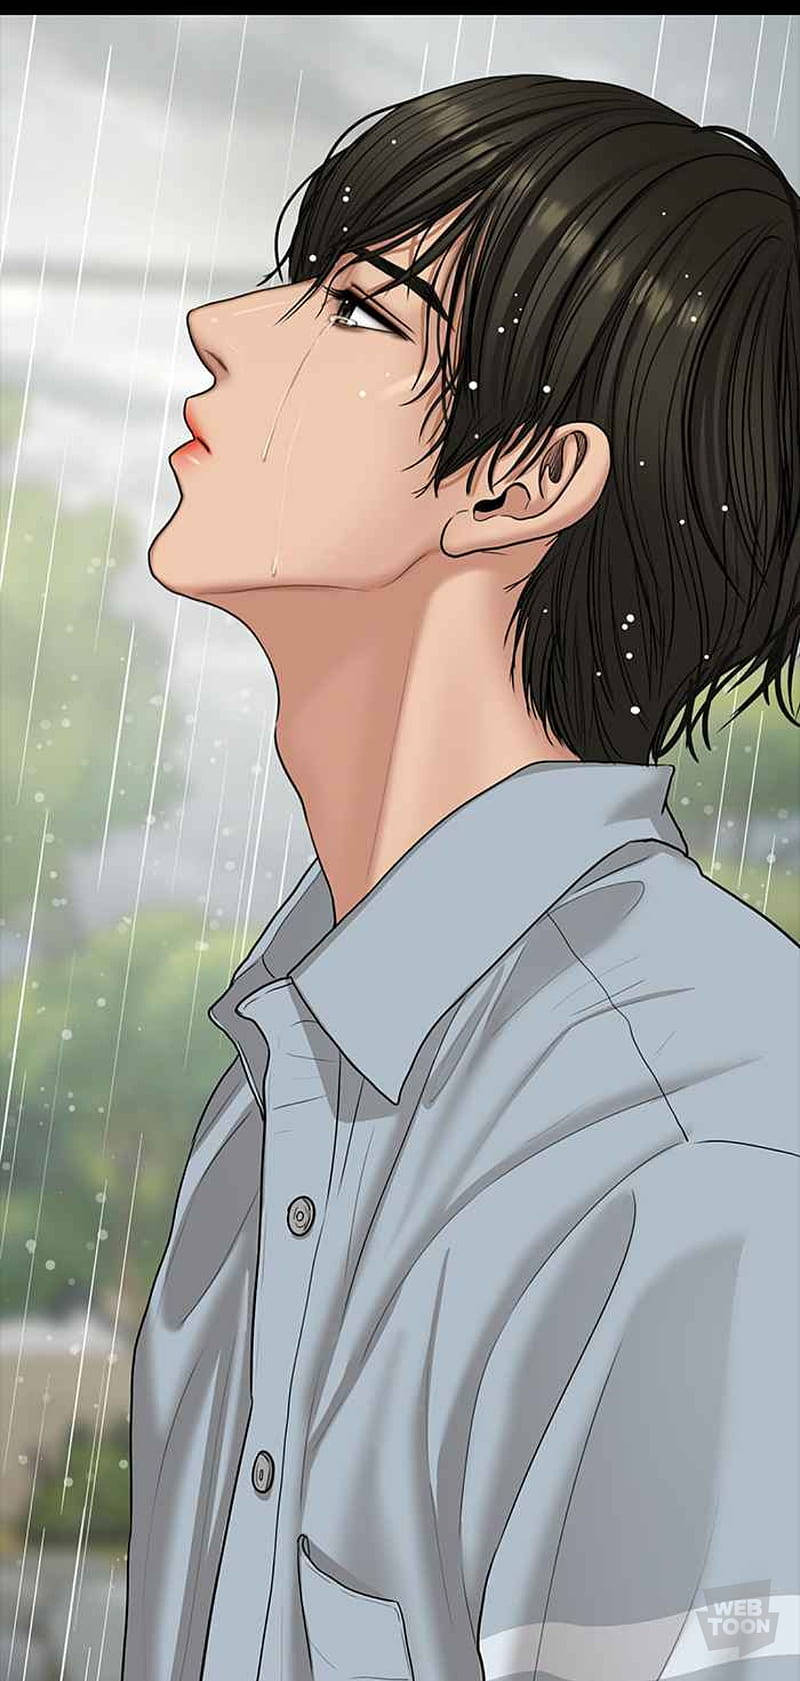 a man is looking up at the rain Wallpaper